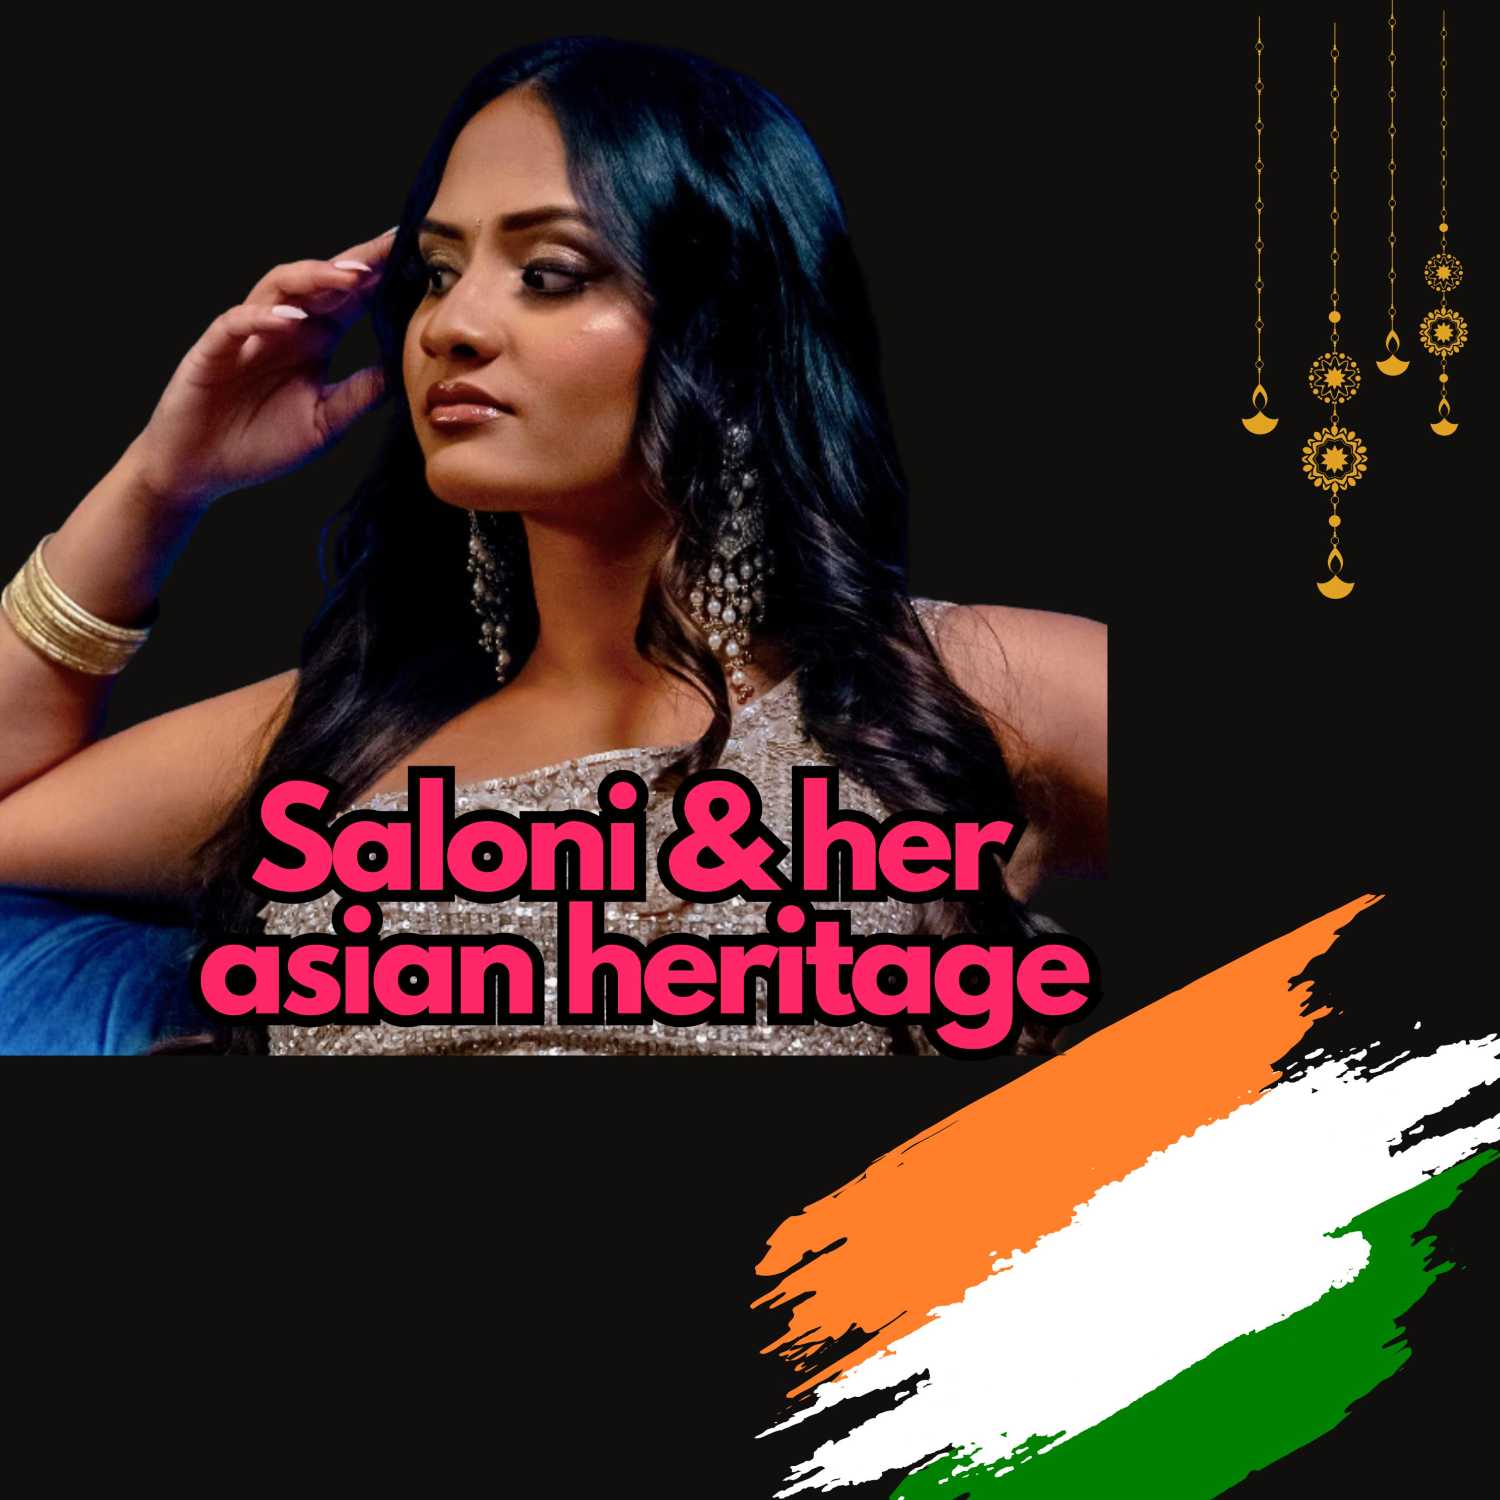 Saloni used to downplay her asian heritage